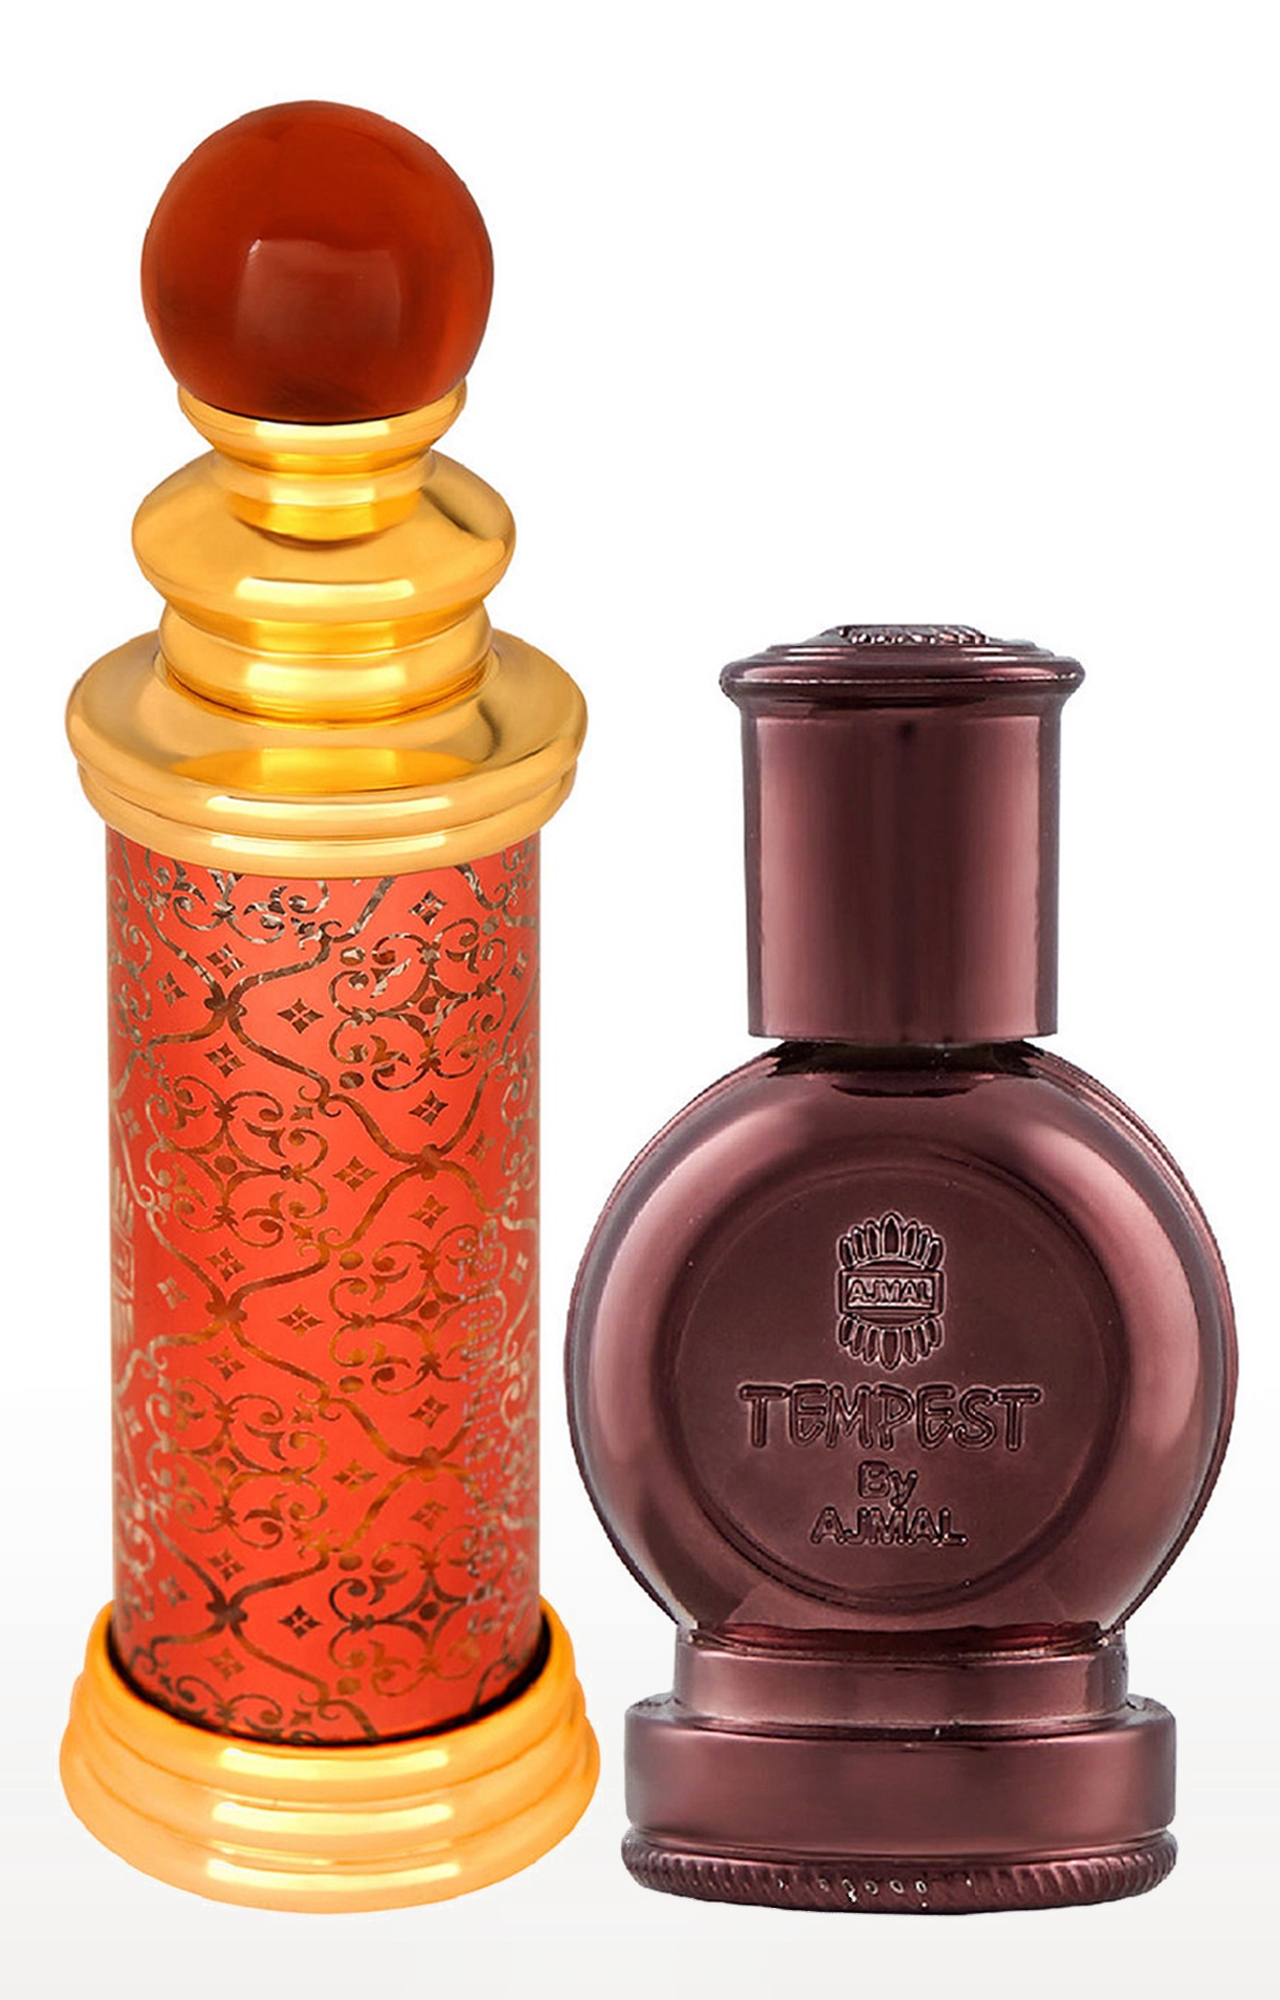 Ajmal | Ajmal Classic Oud Concentrated Perfume Oil Oudh Alcohol-free Attar 10ml for Unisex and Tempest Concentrated Perfume Oil Alcohol-free Attar 12ml for Unisex 0